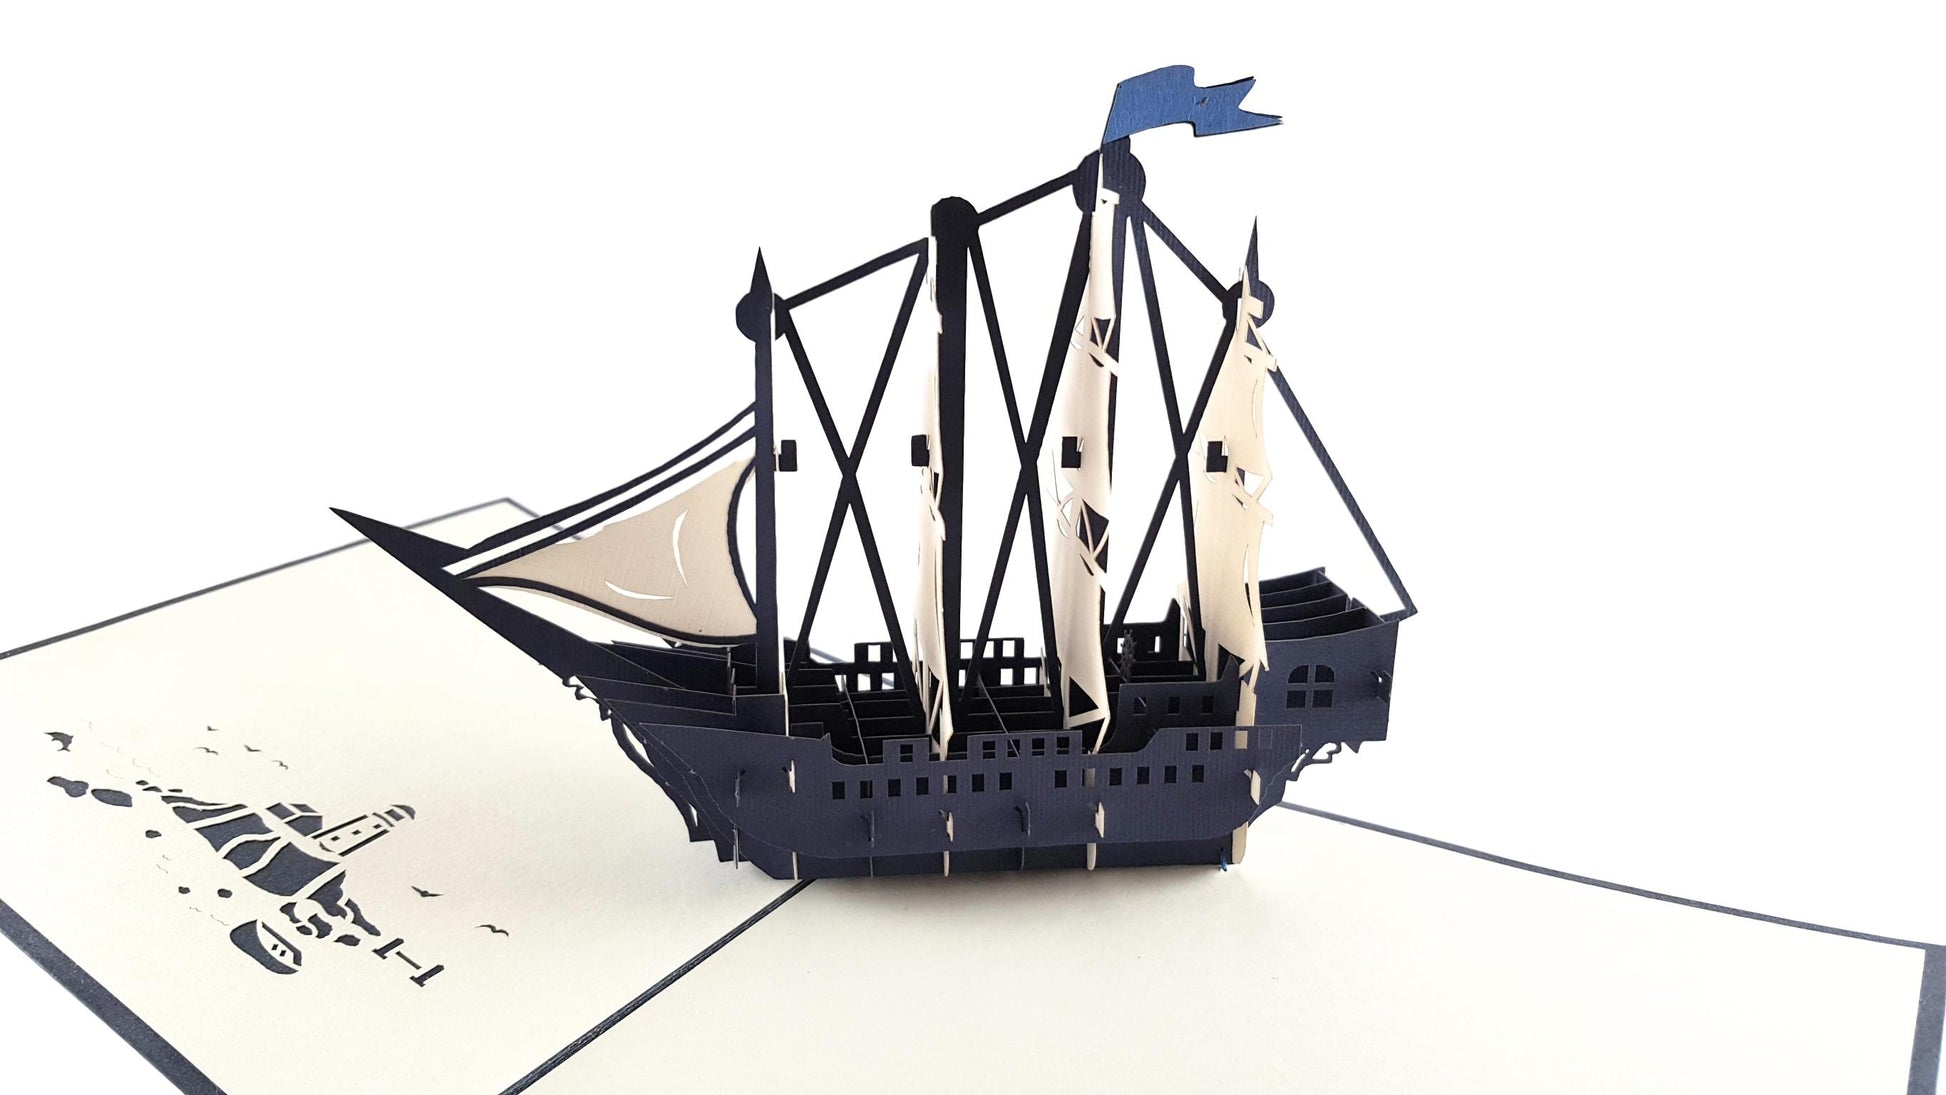 Clipper Ship 3D Pop Up Greeting Card - Admin Assistant Day - Graduation - Just Because - Retirement - iGifts And Cards